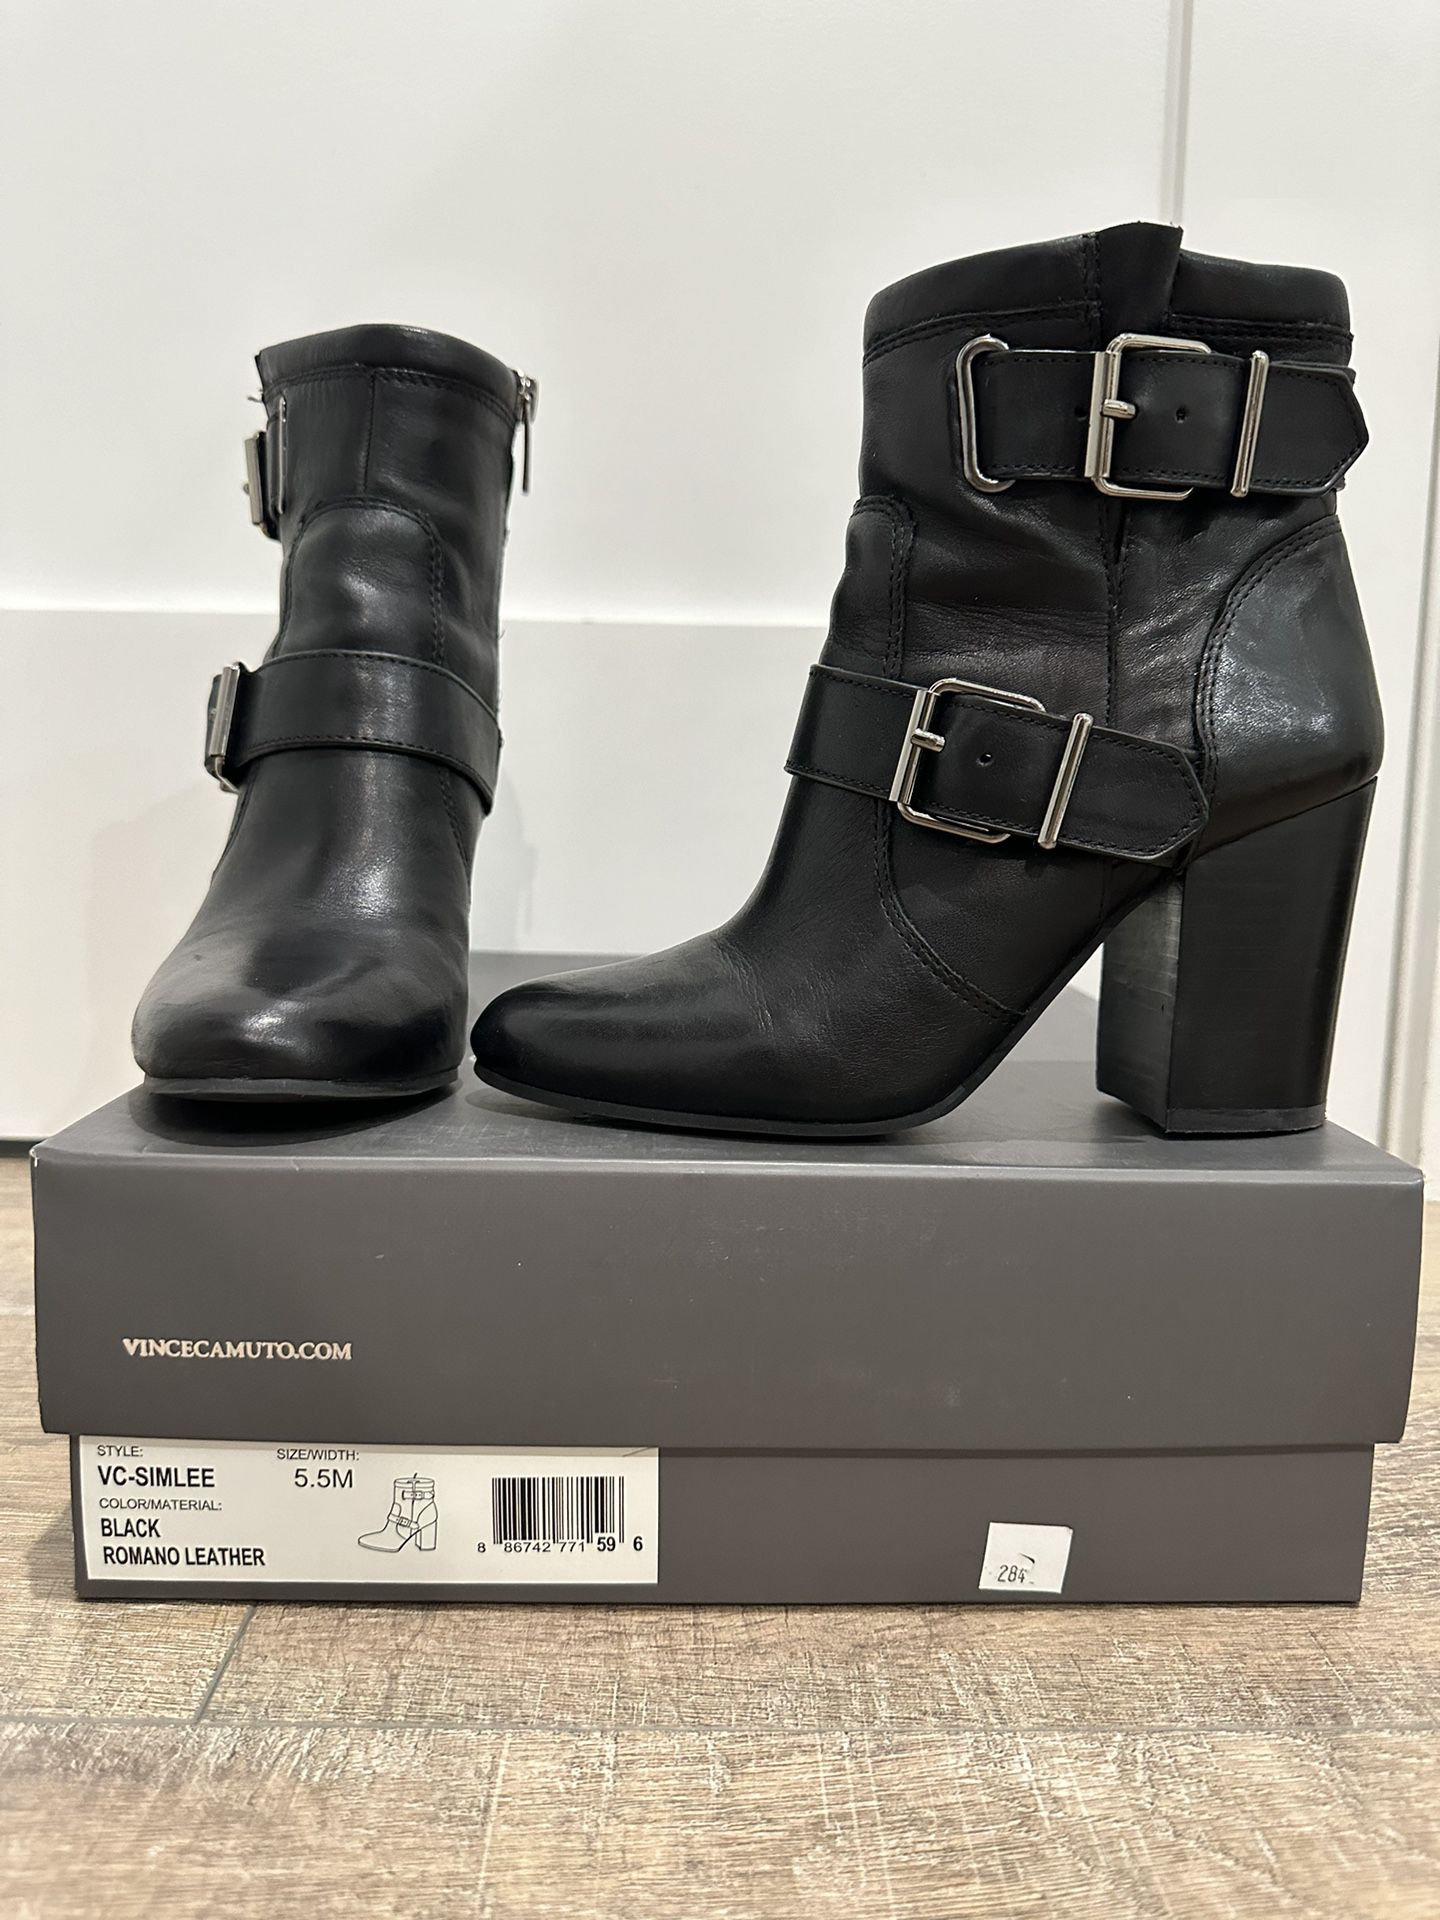 Vince Camuto Simlee Women’s Black Leather Boots